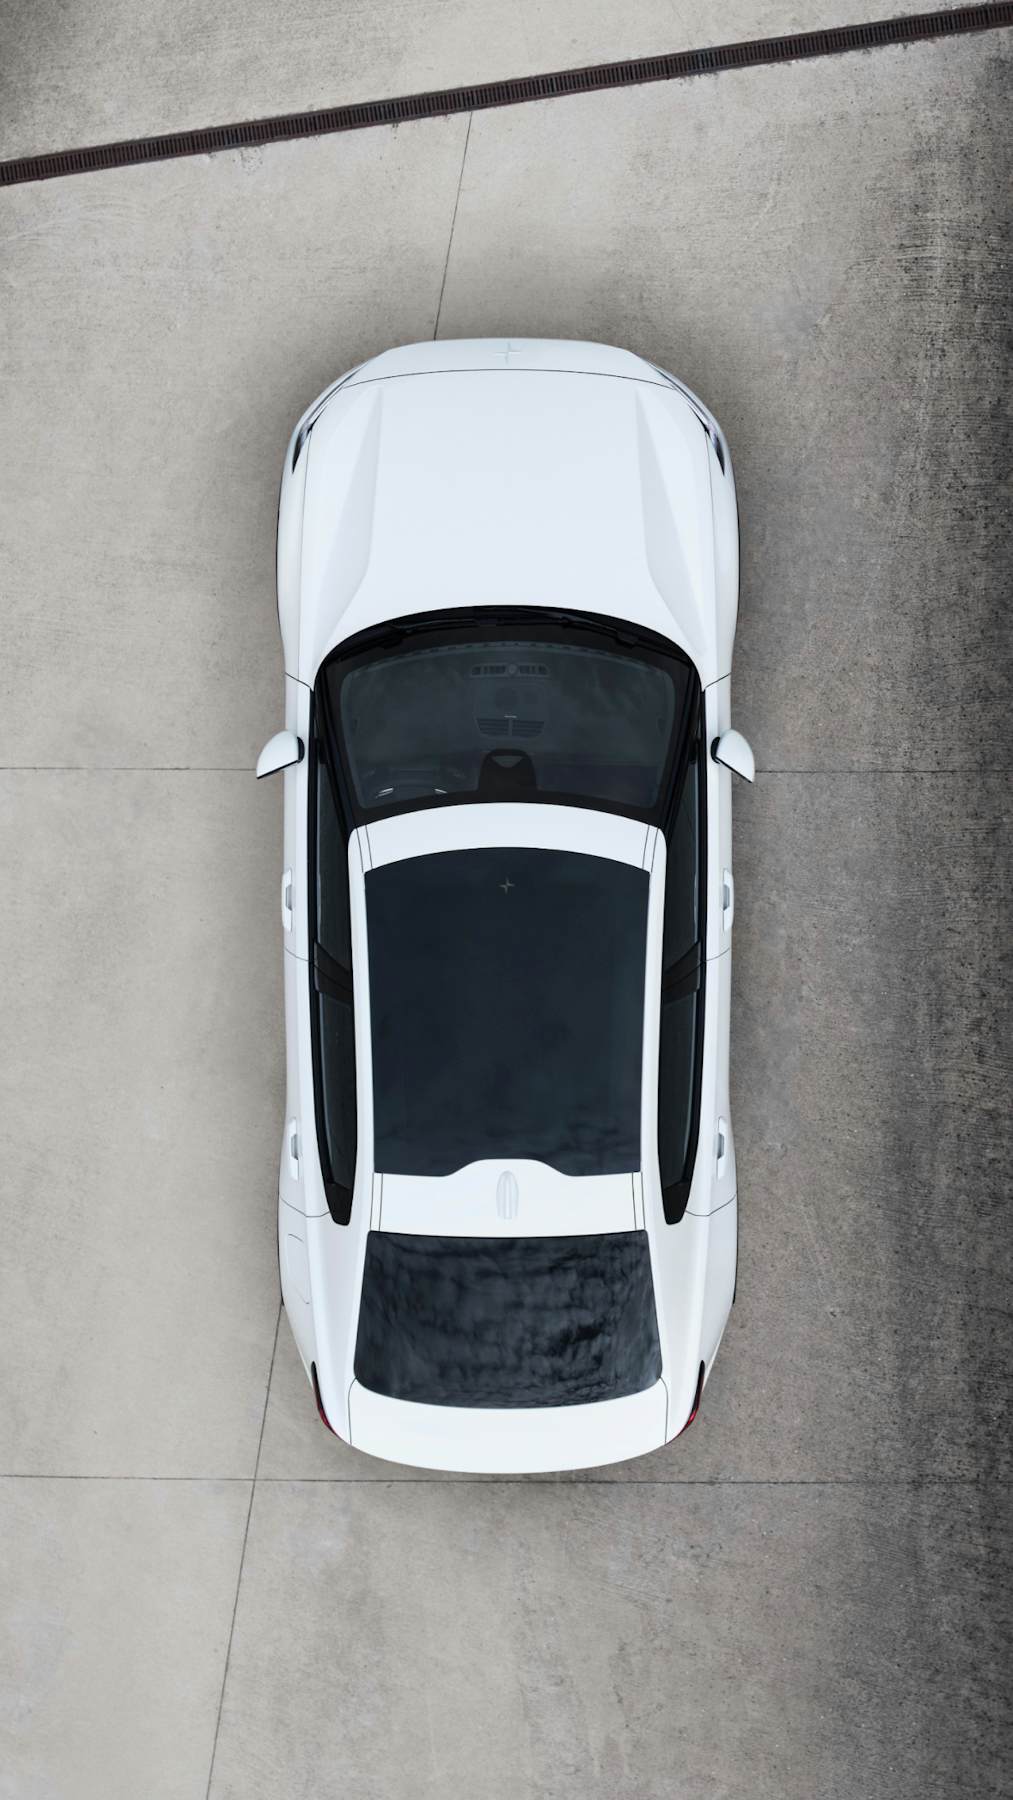 Top view of a white Polestar 2 parked on a concrete floor